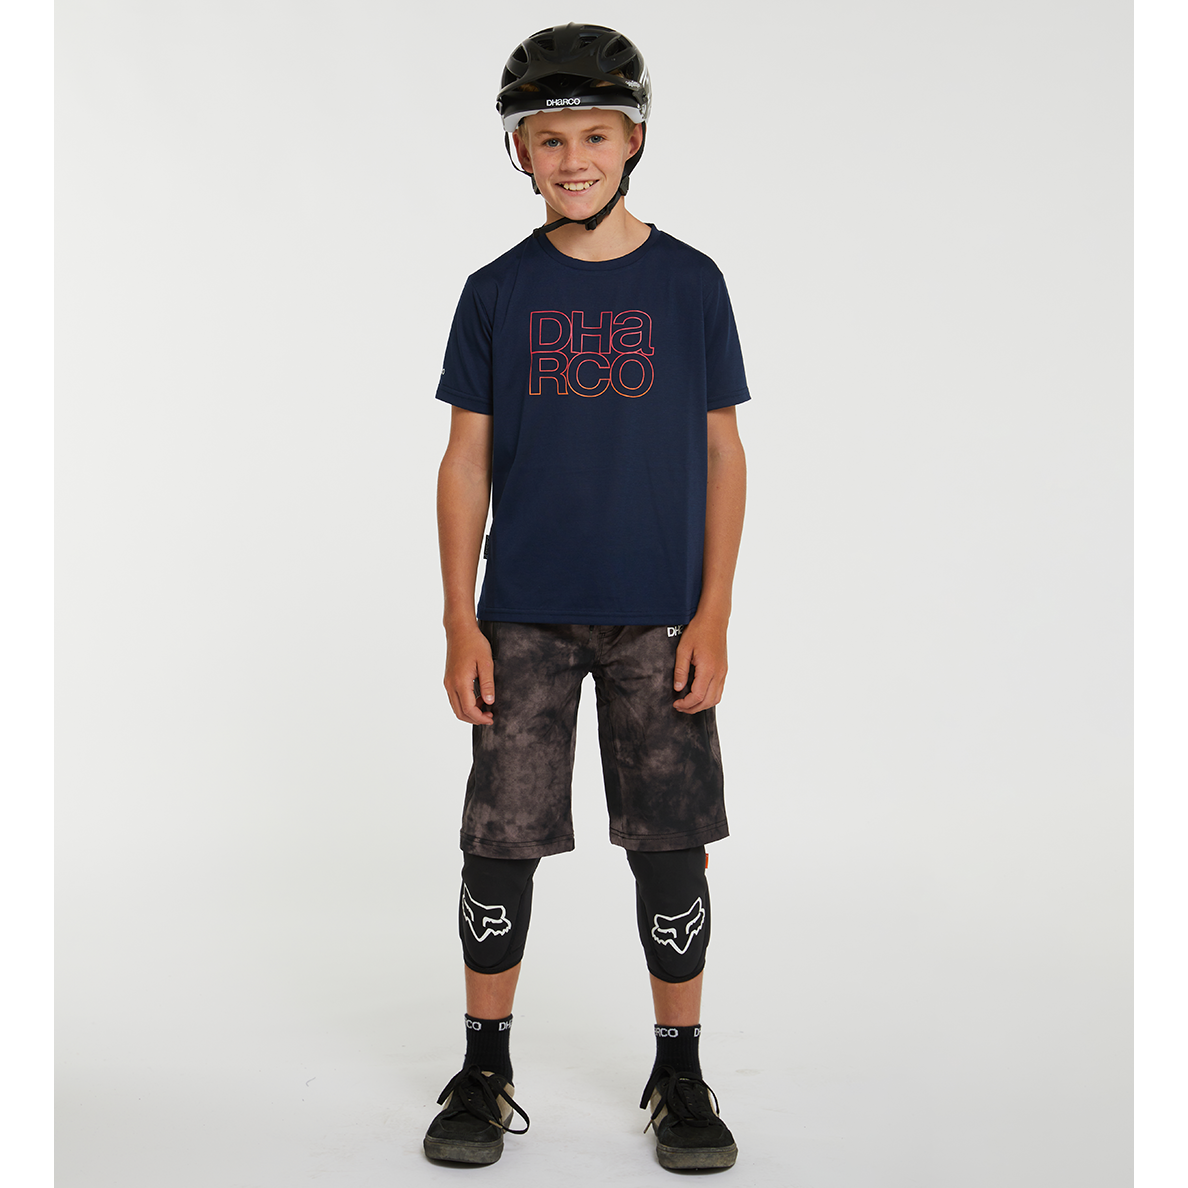 DHaRCO Youth Short Sleeve Tech Tee - Youth 2XL - Neon Navy